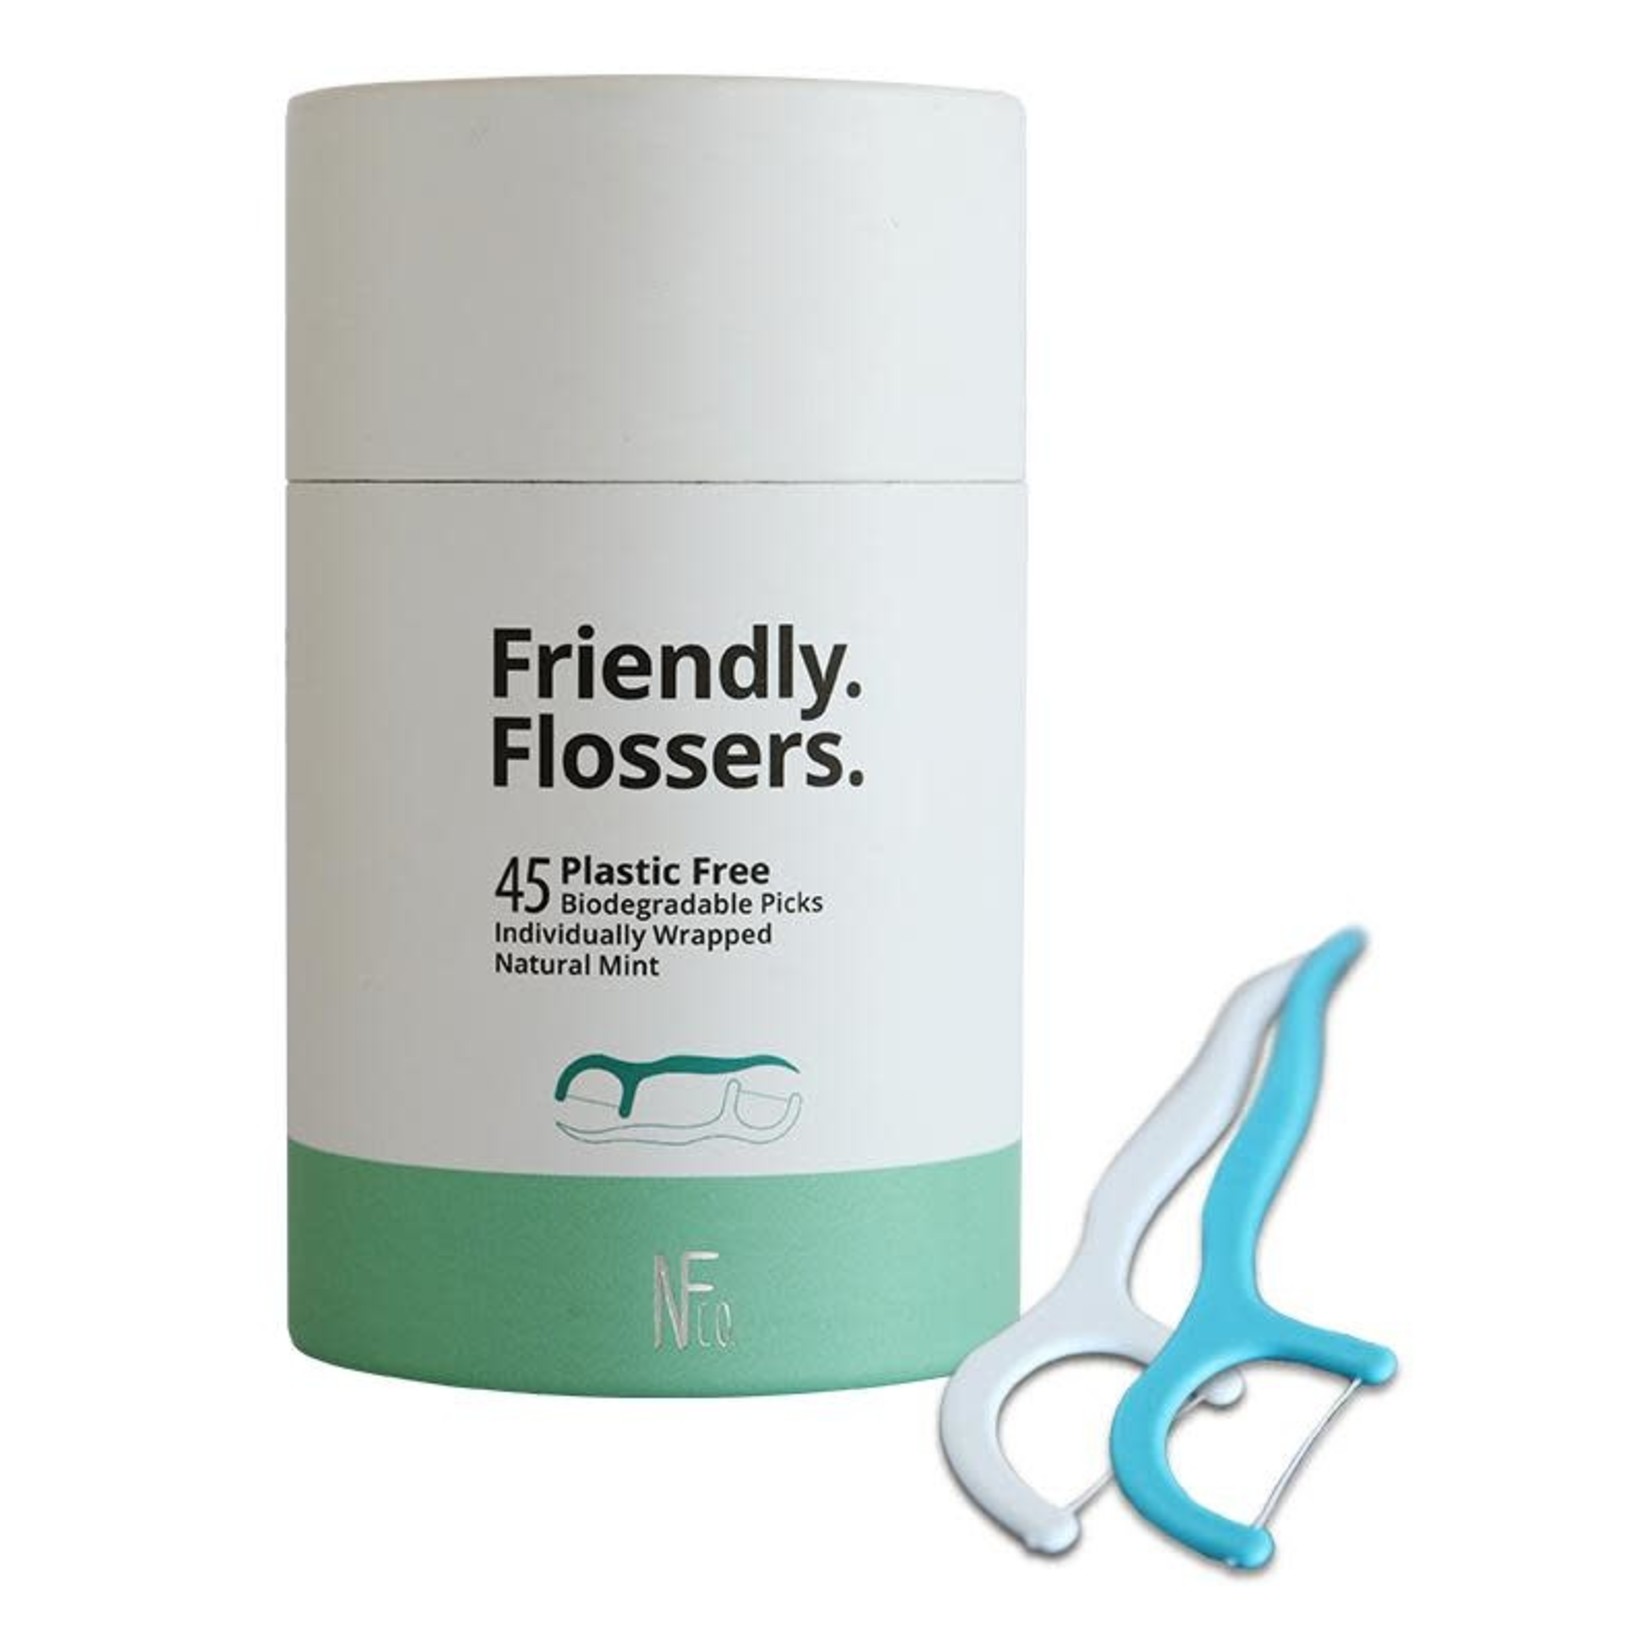 The NF Co. The Natural Family Co. Friendly Flossers Picks